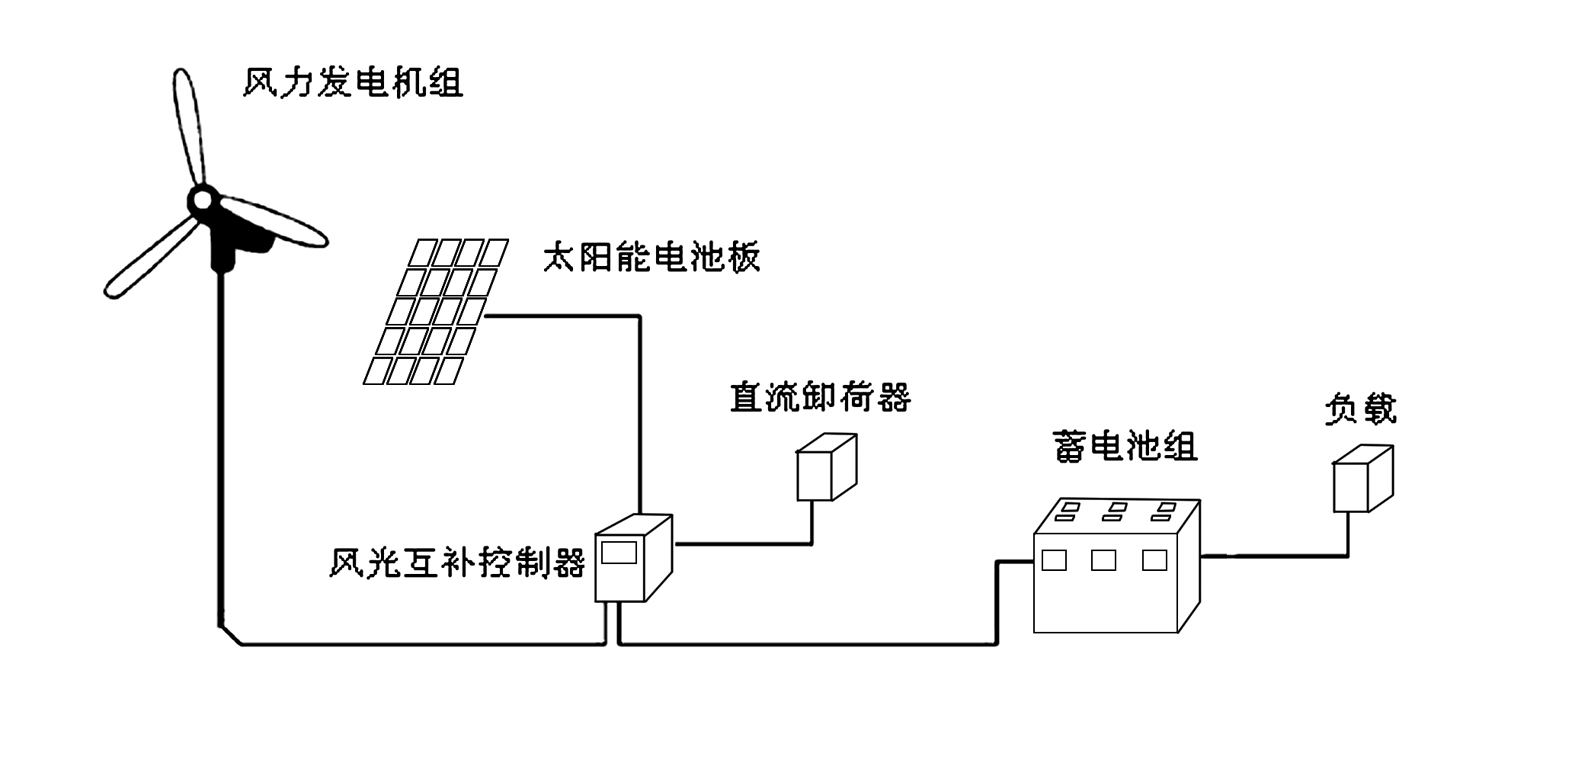 Remote monitoring maintenance method and system based on 3G and wind-solar complementary power supply technology